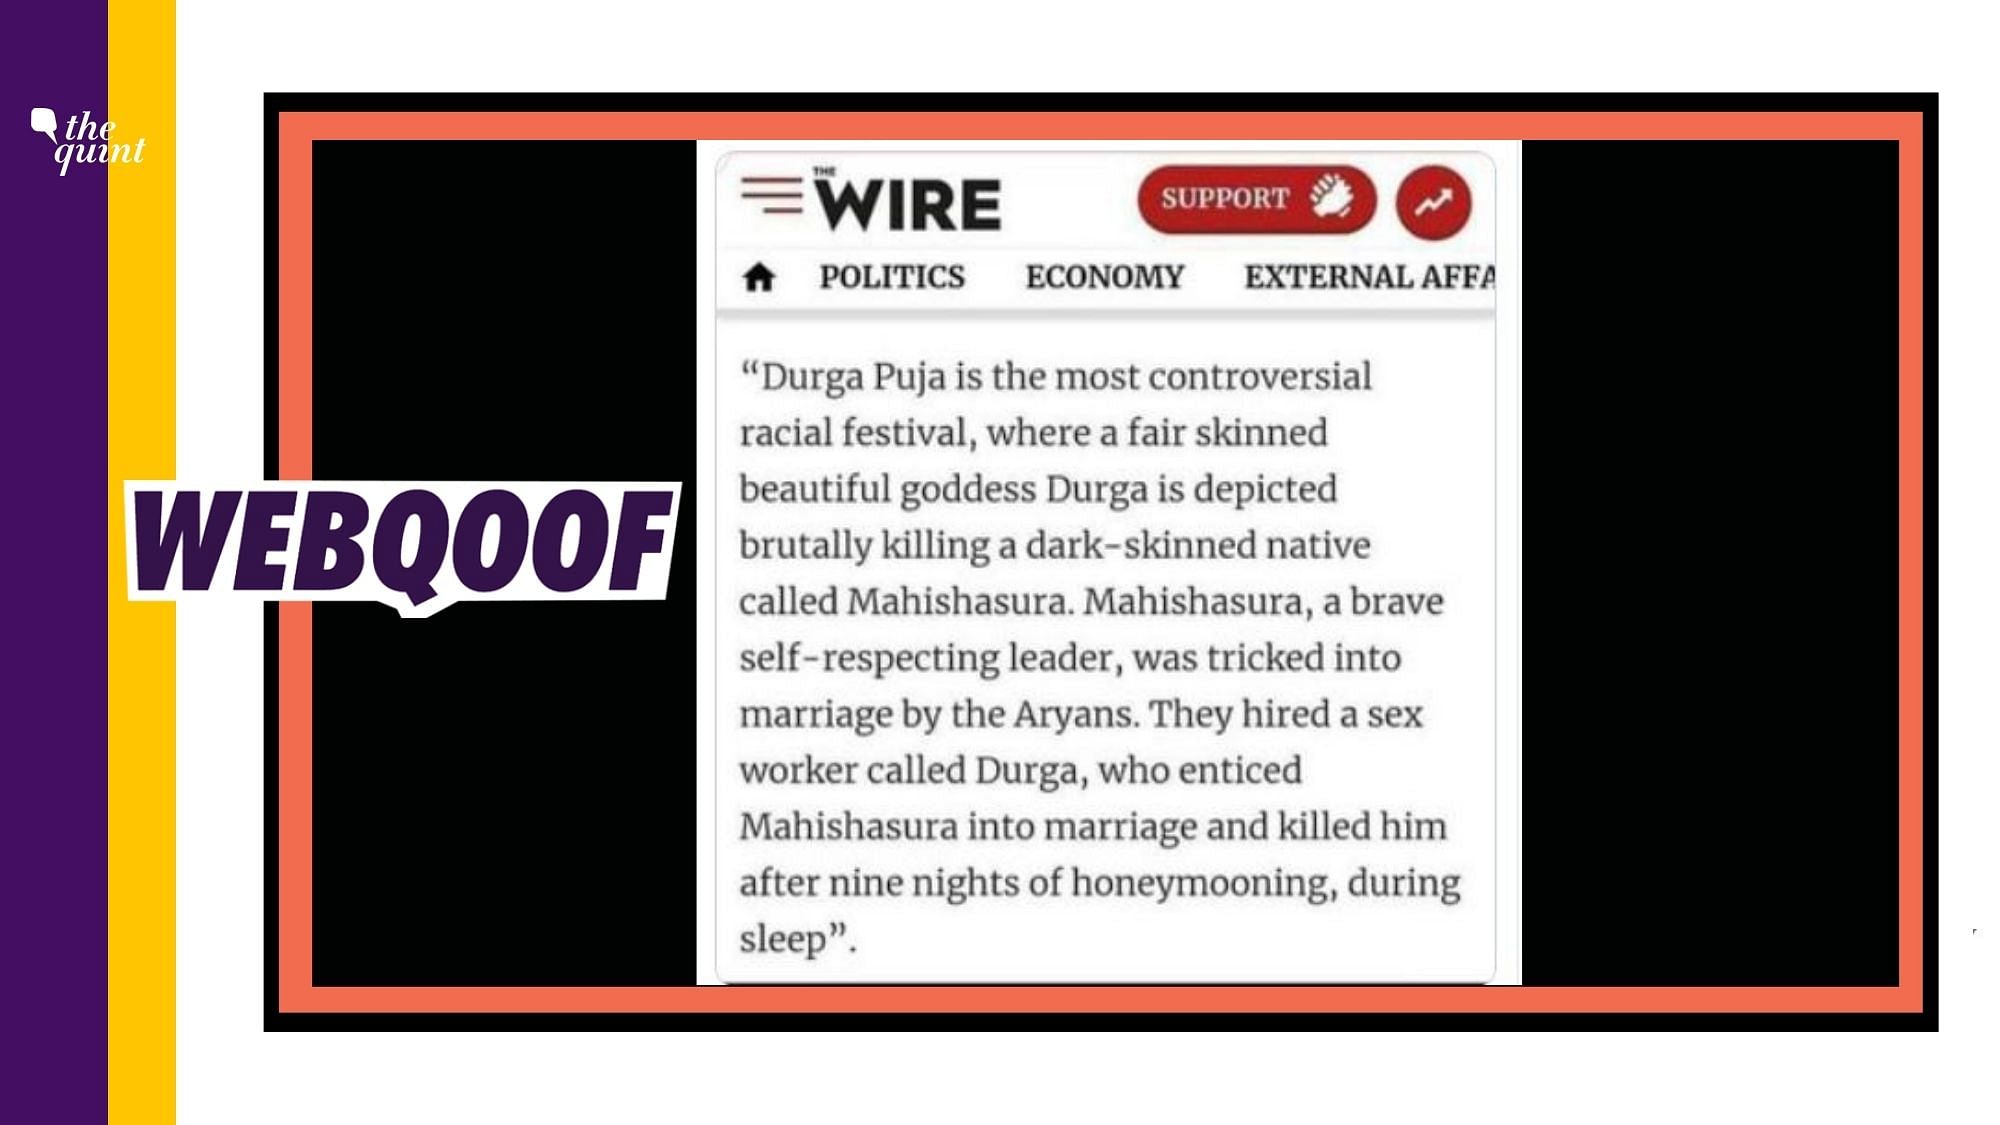 An excerpt from a report by The Wire is doing the rounds on social media to claim that the news portal intentionally disrespected <a href="https://www.thequint.com/topic/durga-puja">Hindu goddess Durga</a>.